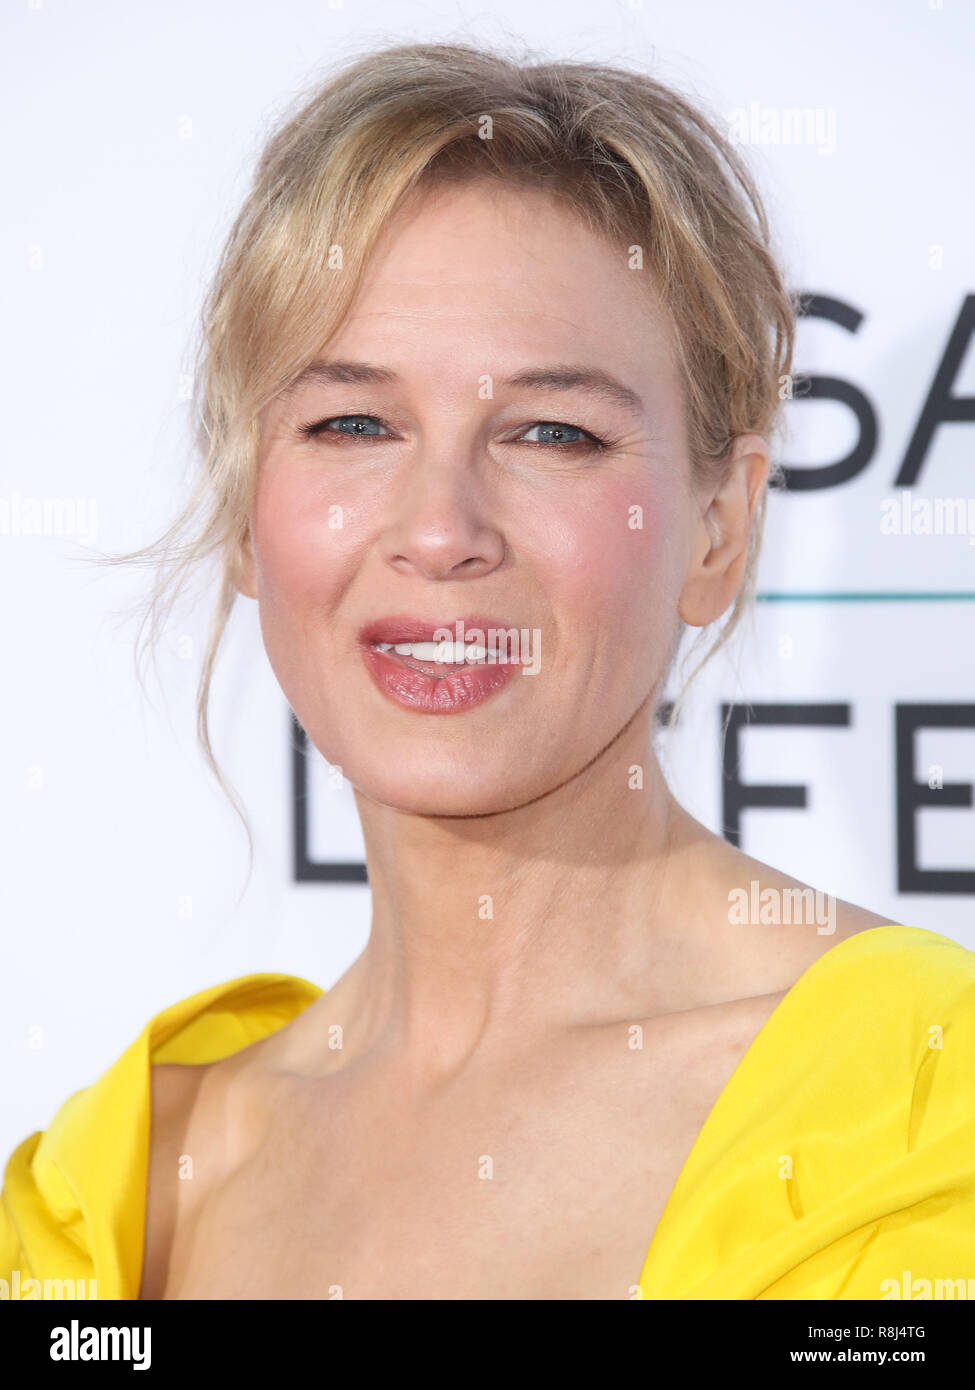 WESTWOOD, LOS ANGELES, CA, USA - OCTOBER 12: Actress Renee Zellweger wearing a Carolina Herrera dress arrives at the Los Angeles Premiere Of Paramount Pictures And Pure Flix Entertainment's 'Same Kind Of Different As Me' held at Westwood Village Theatre on October 12, 2017 in Westwood, Los Angeles, California, United States. (Photo by Xavier Collin/Image Press Agency) Stock Photo